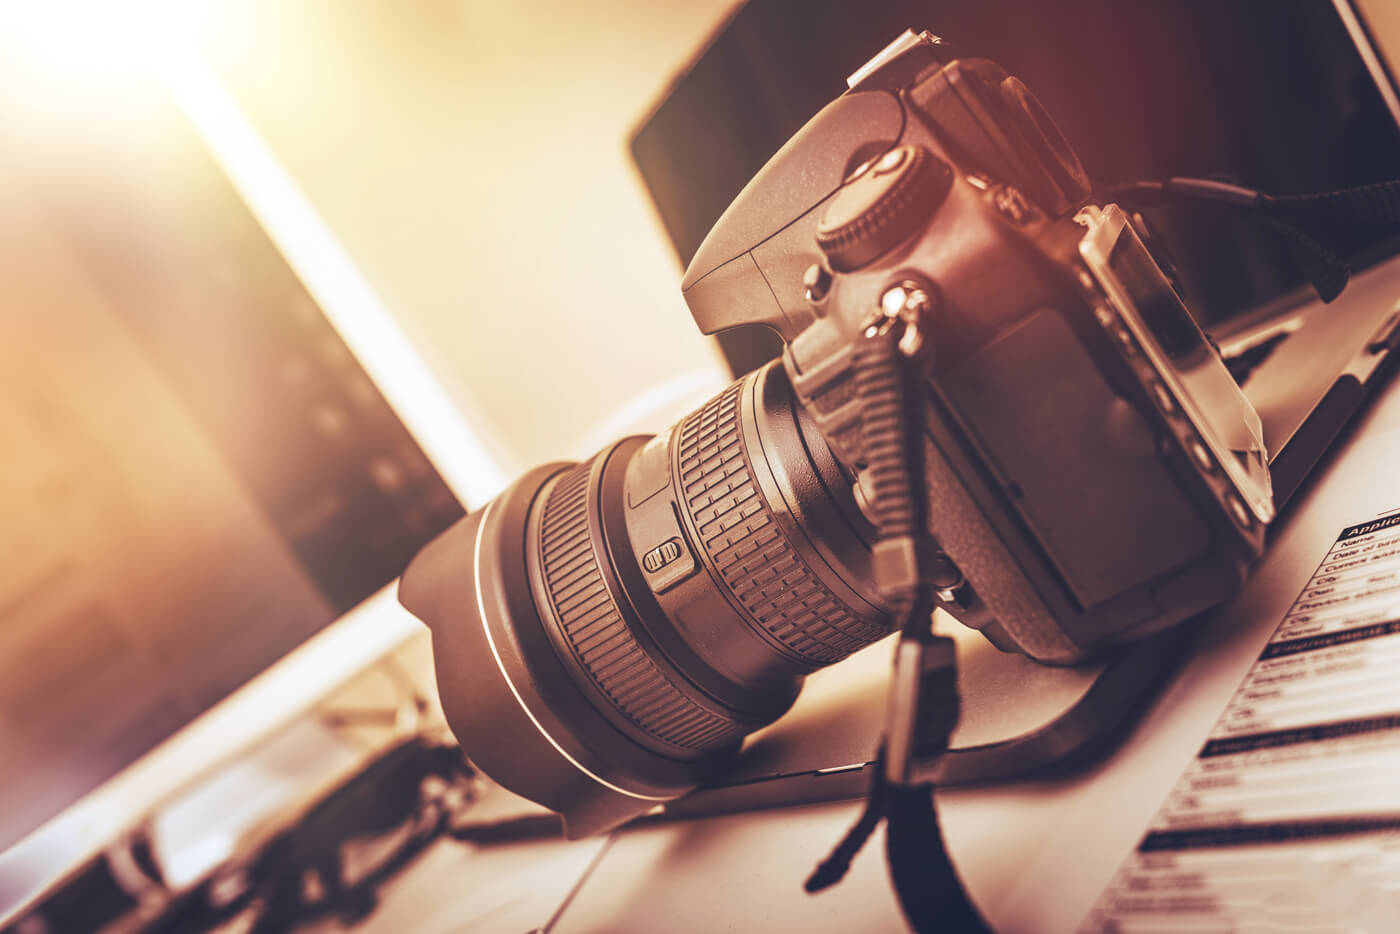 Nikon is offering free online photography courses this month